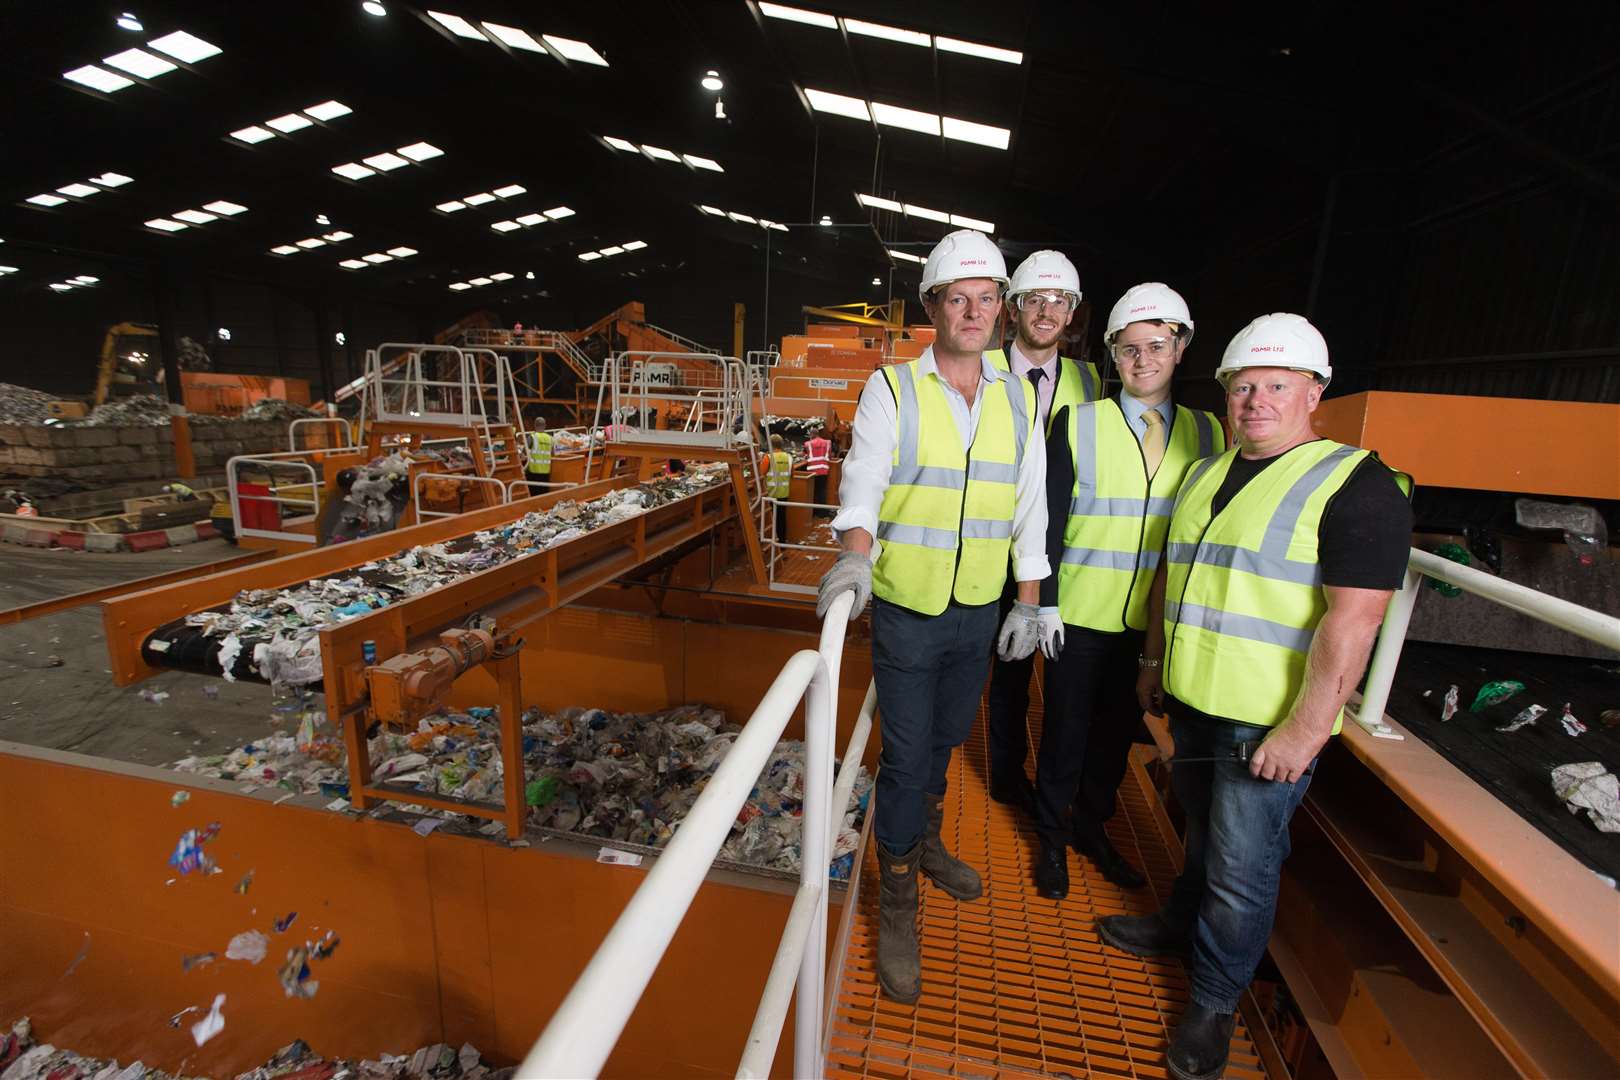 At its facility in Chatham Docks, P&D Materials co-founders David Jenner, left, and Paul Watkinson, right, flank Lloyds Bank's Liam Jolliff and Luke Ponikwer